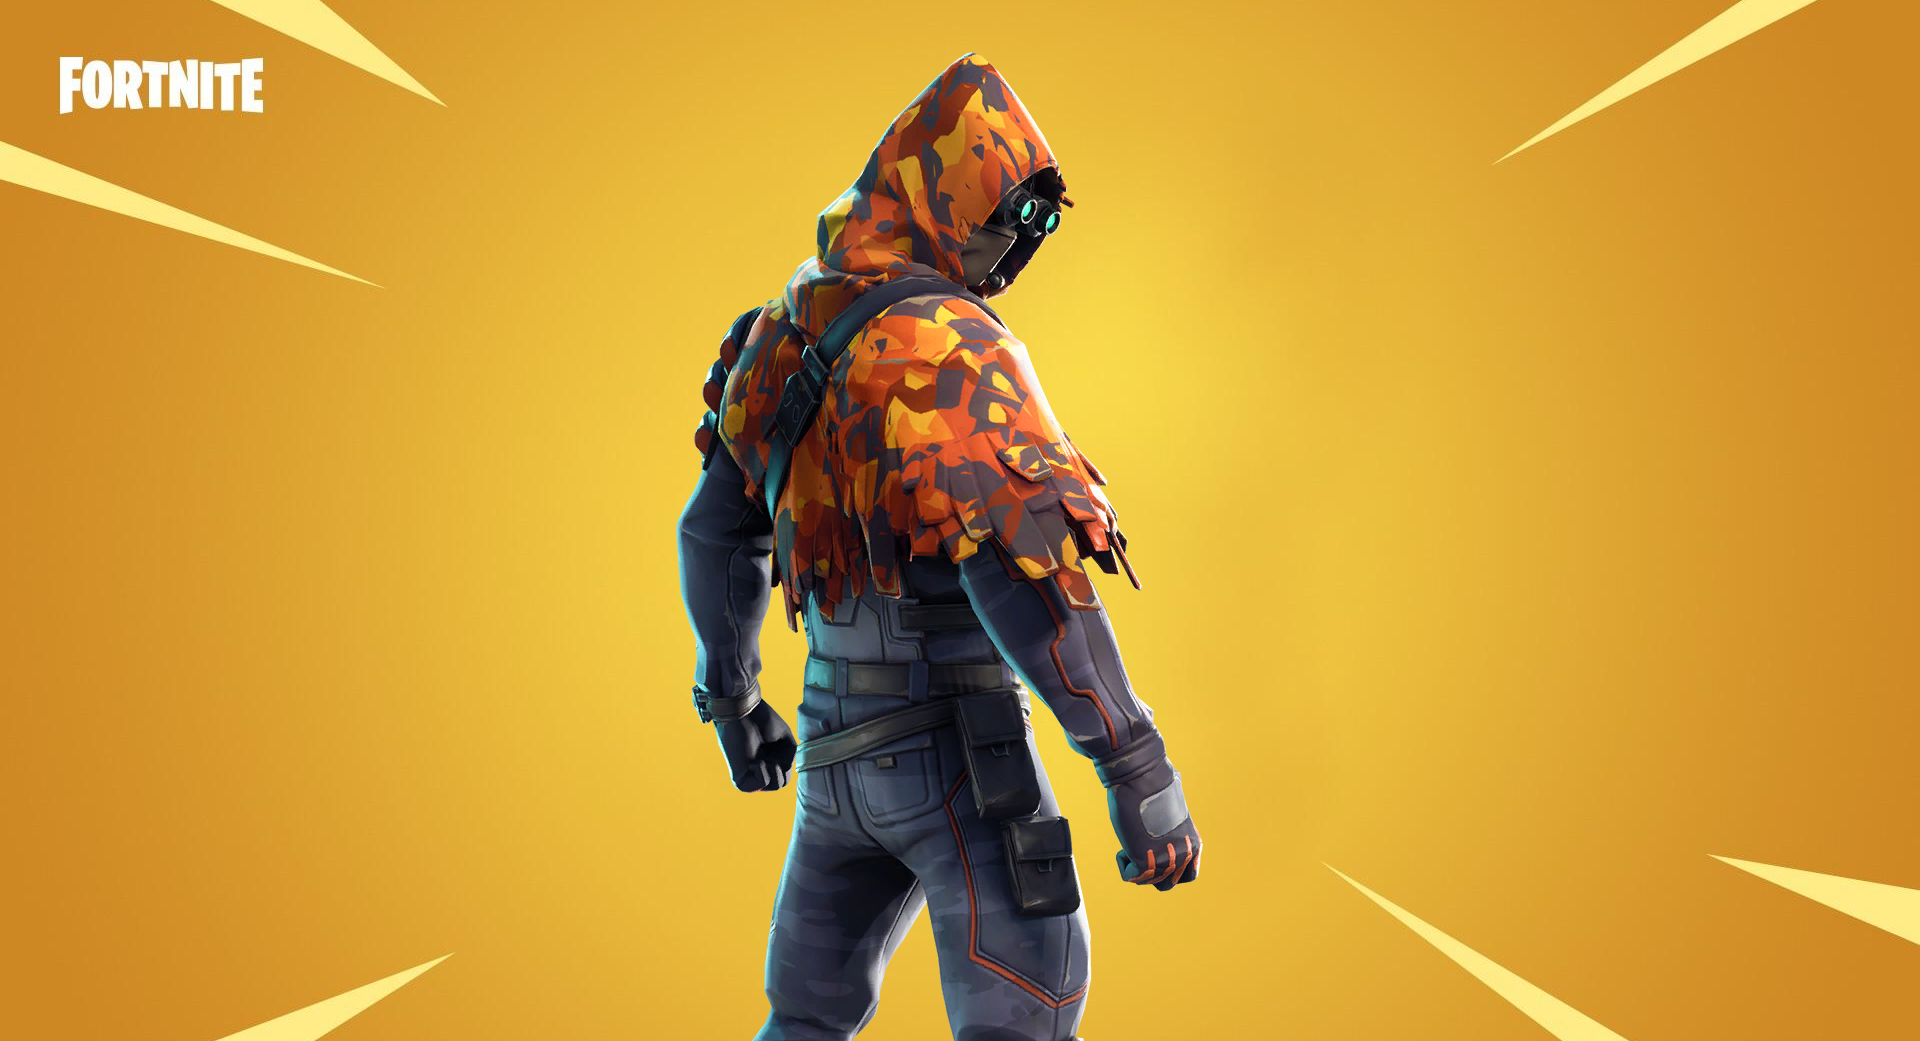 Fortnite 6.31 leaks reveal new skins and cosmetics coming ... - 1920 x 1041 png 722kB